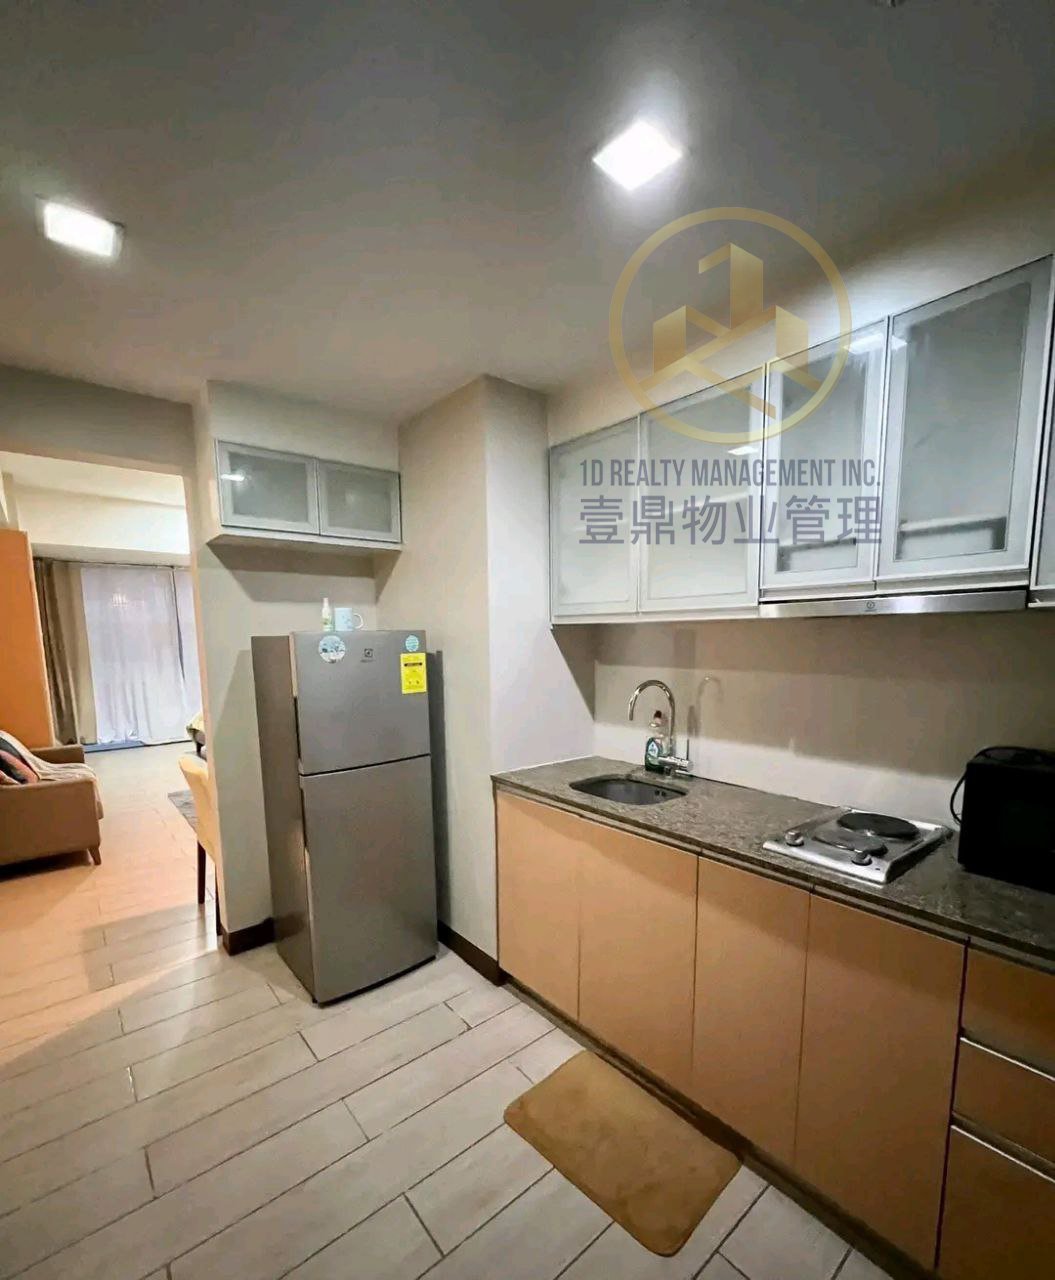 Three Central Salcedo Village, Makati City - FOR LEASE